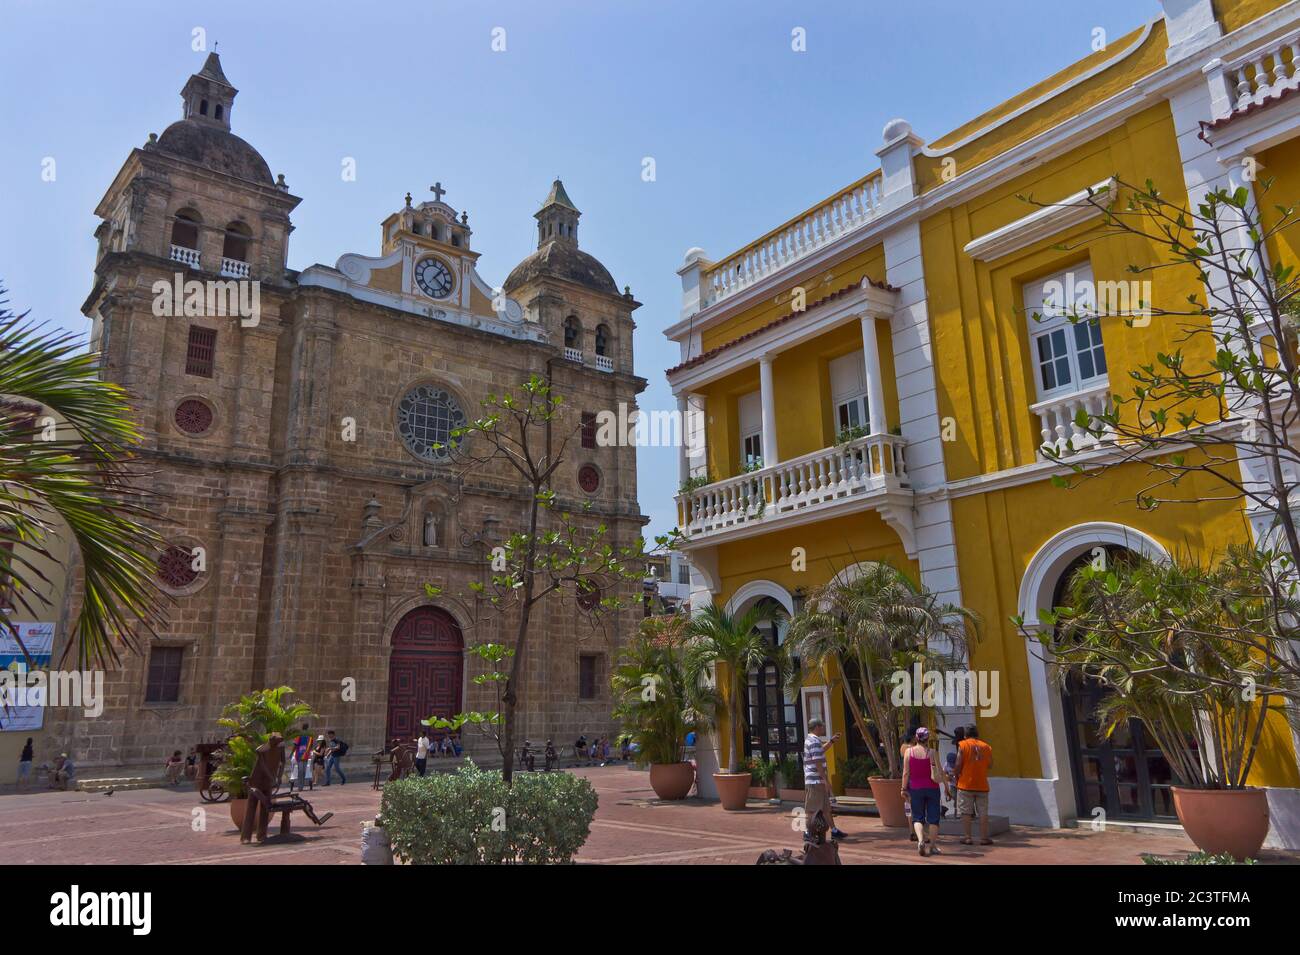 Old city street view Cartagena, Colombia, South America Stock Photo